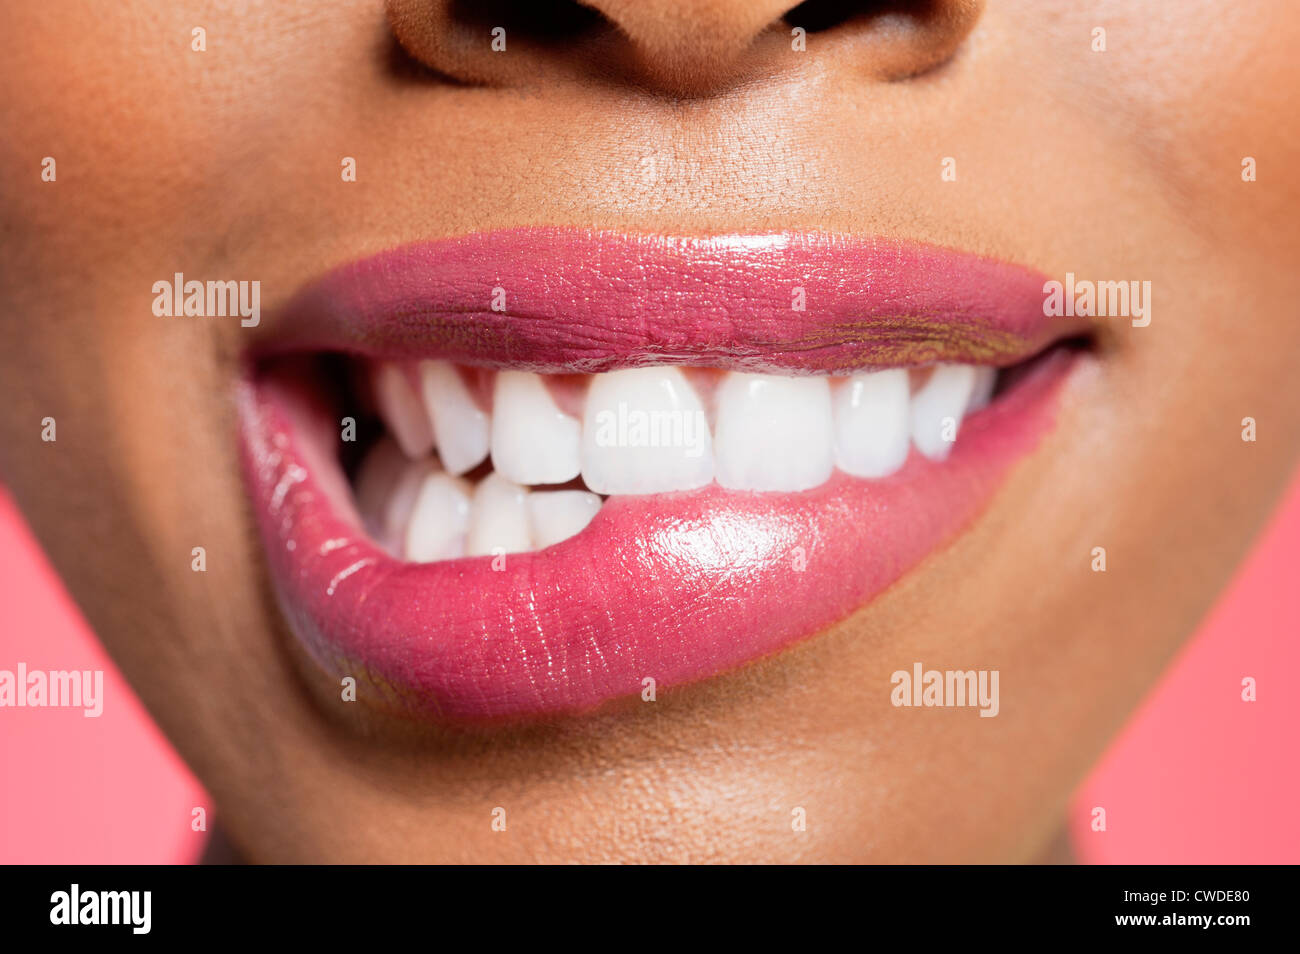 Close-up view of an female biting her lip over colored background Stock Photo